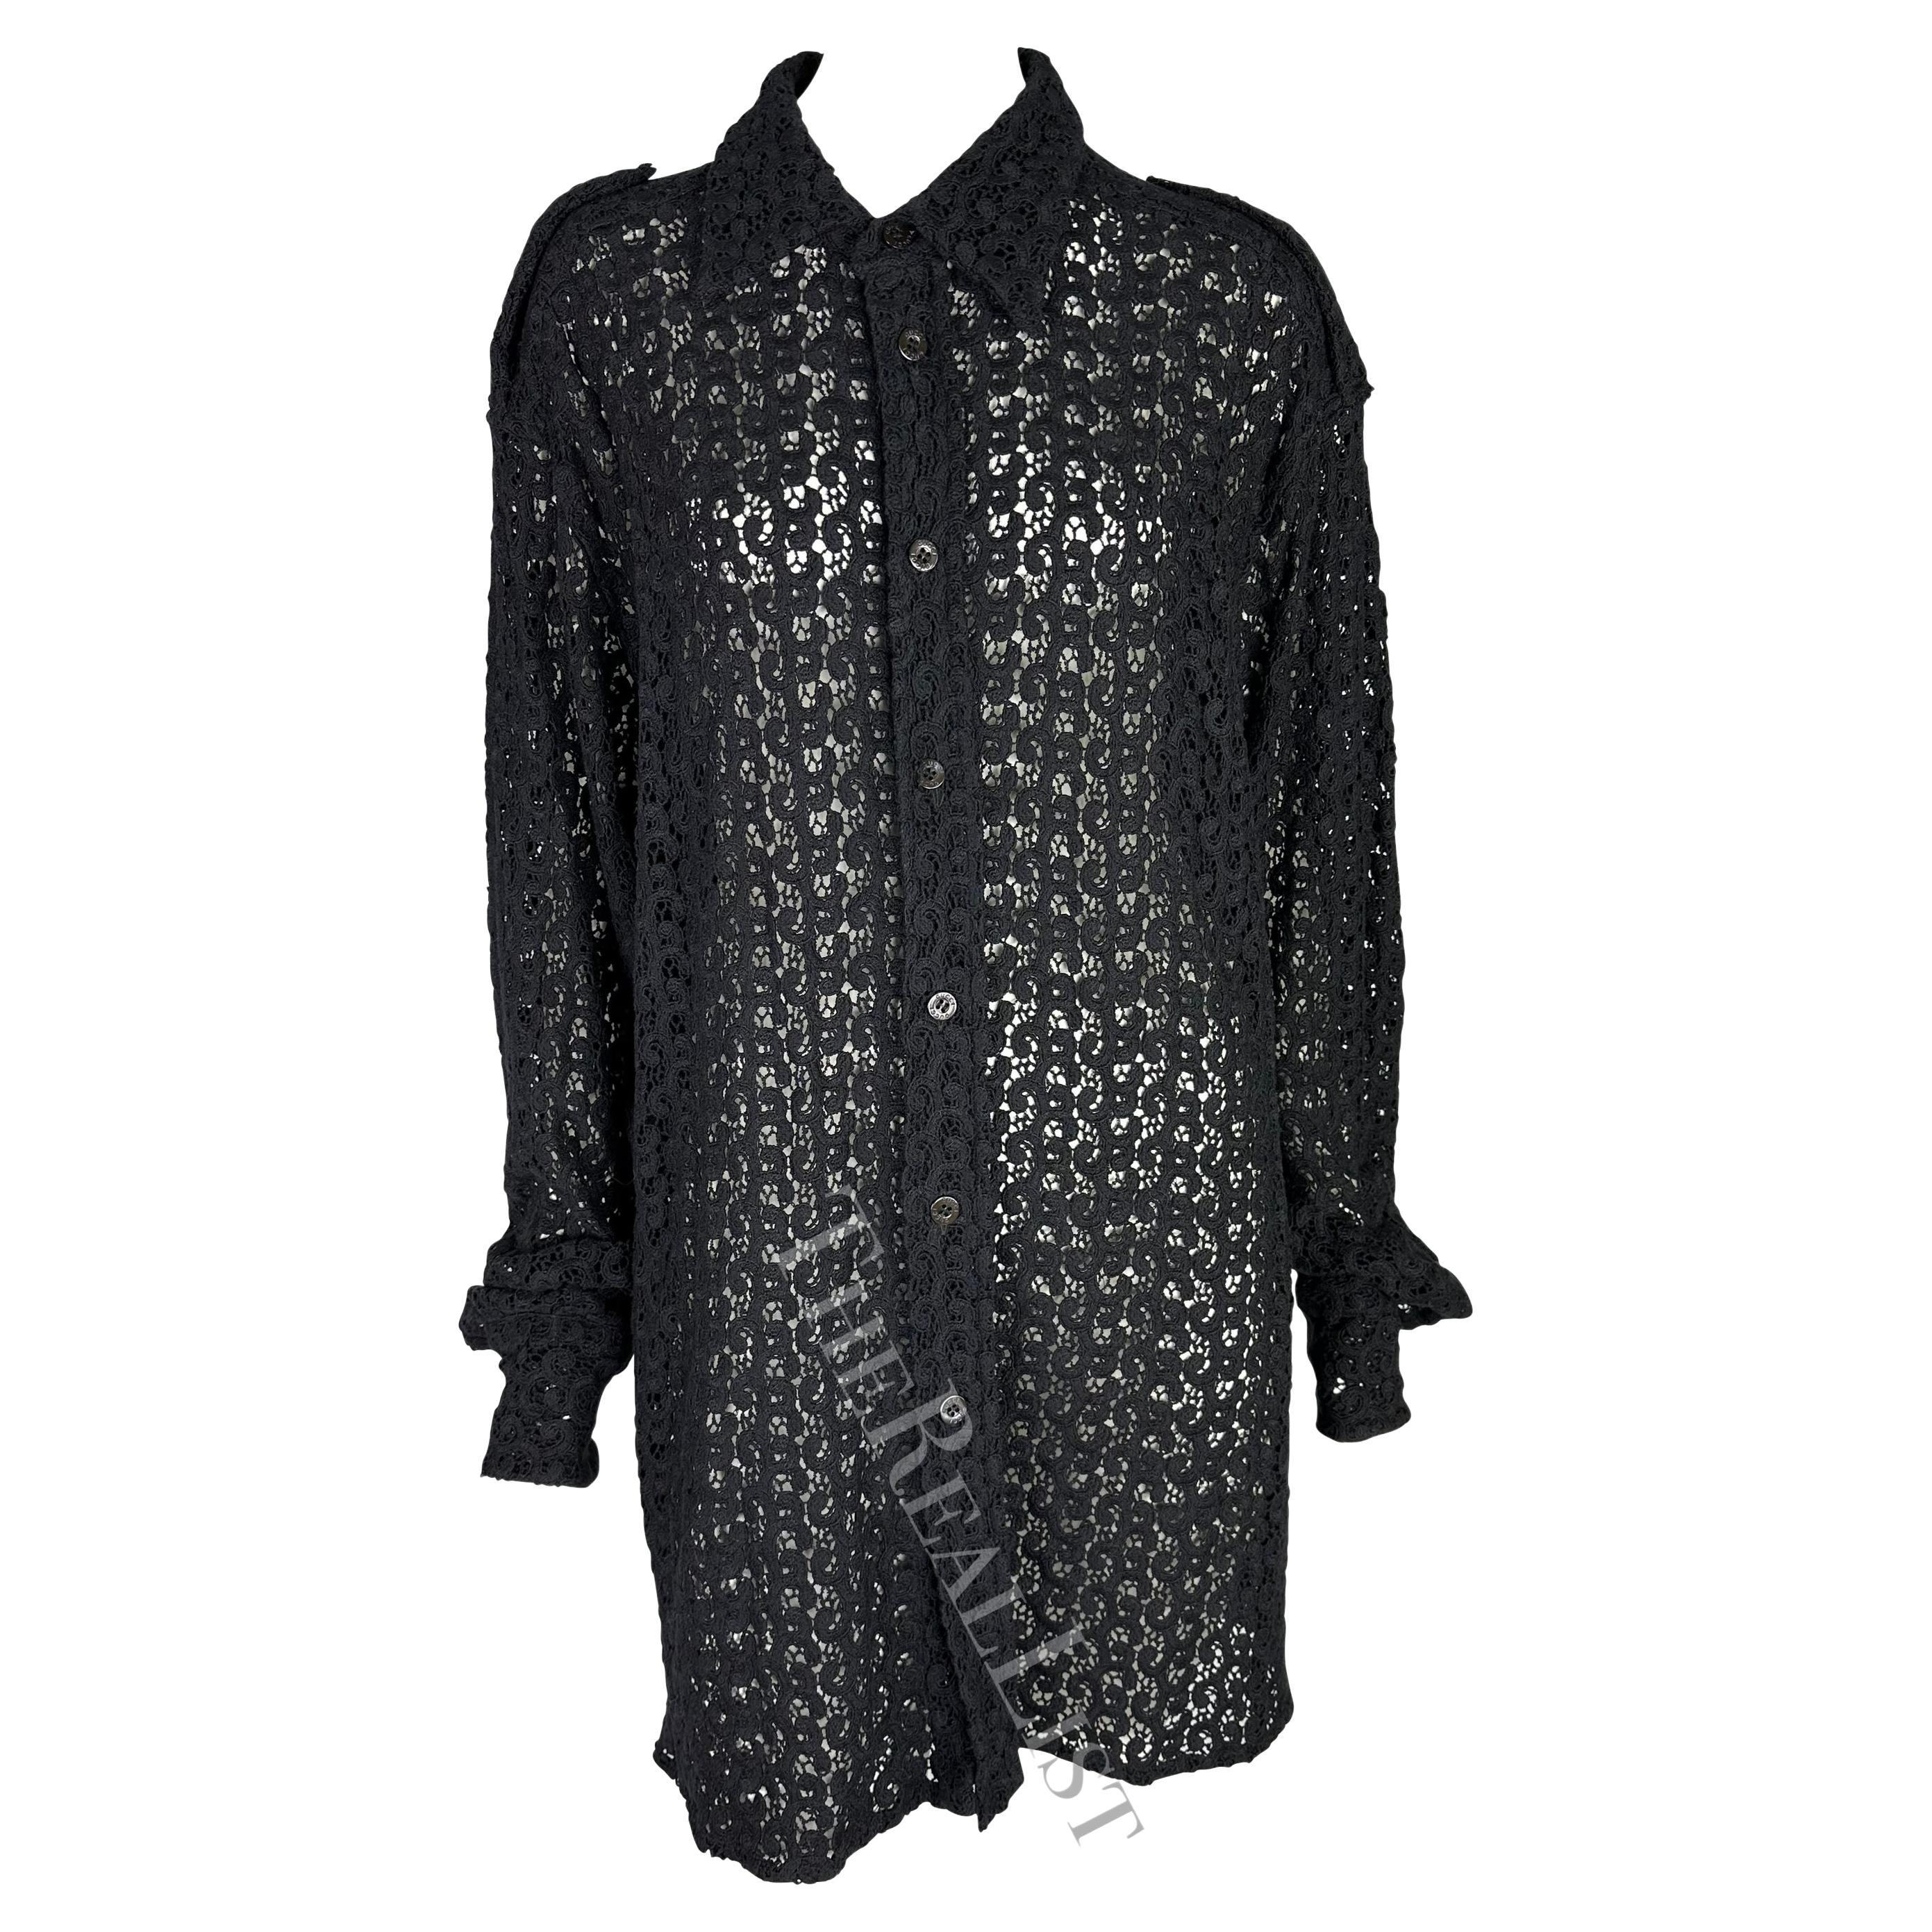 S/S 1996 Gucci by Tom Ford Men's Black Crochet Lace Oversized Sheer Shirt For Sale